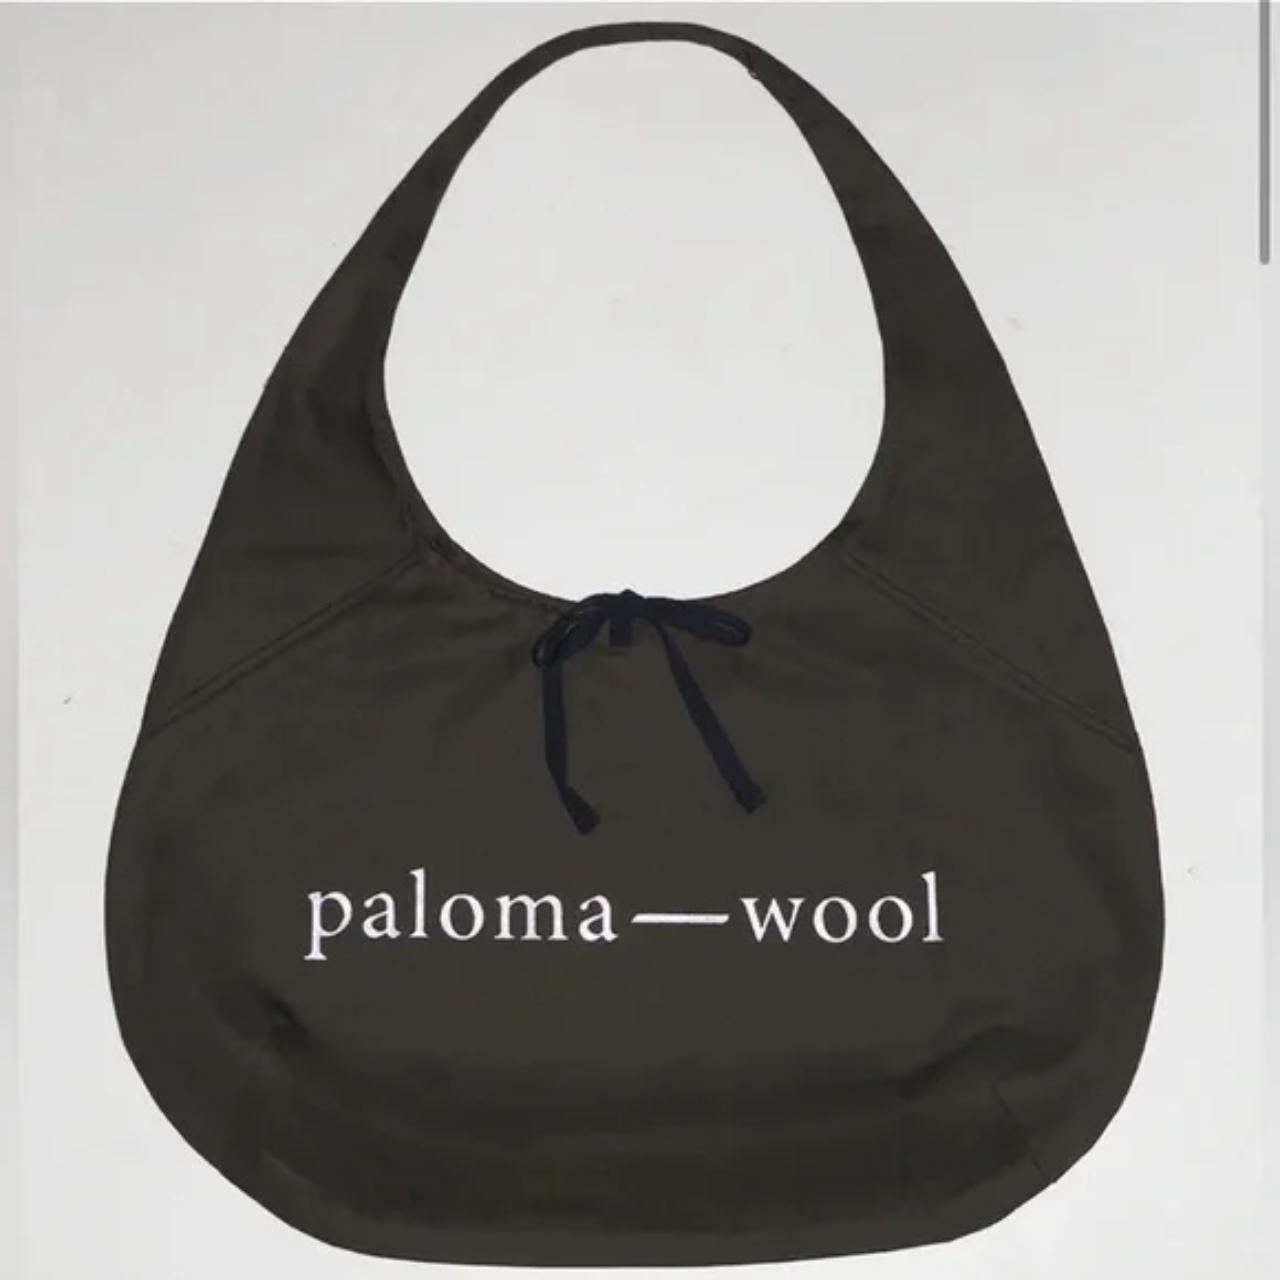 NWOT Paloma Wool Limited Edition 10 Year Anniversary - Depop